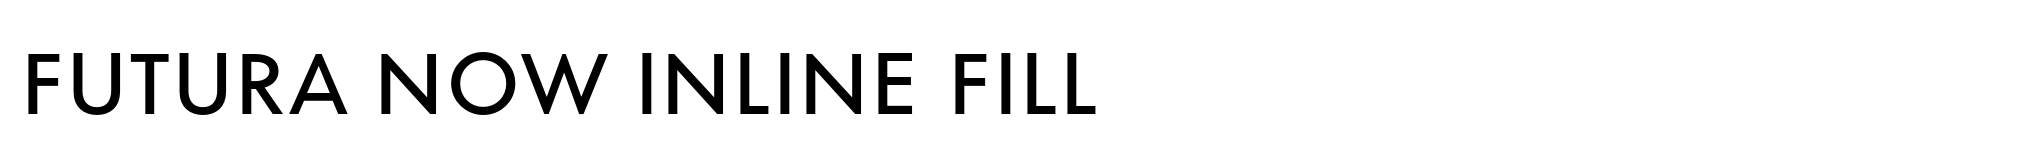 Futura Now Inline Fill image